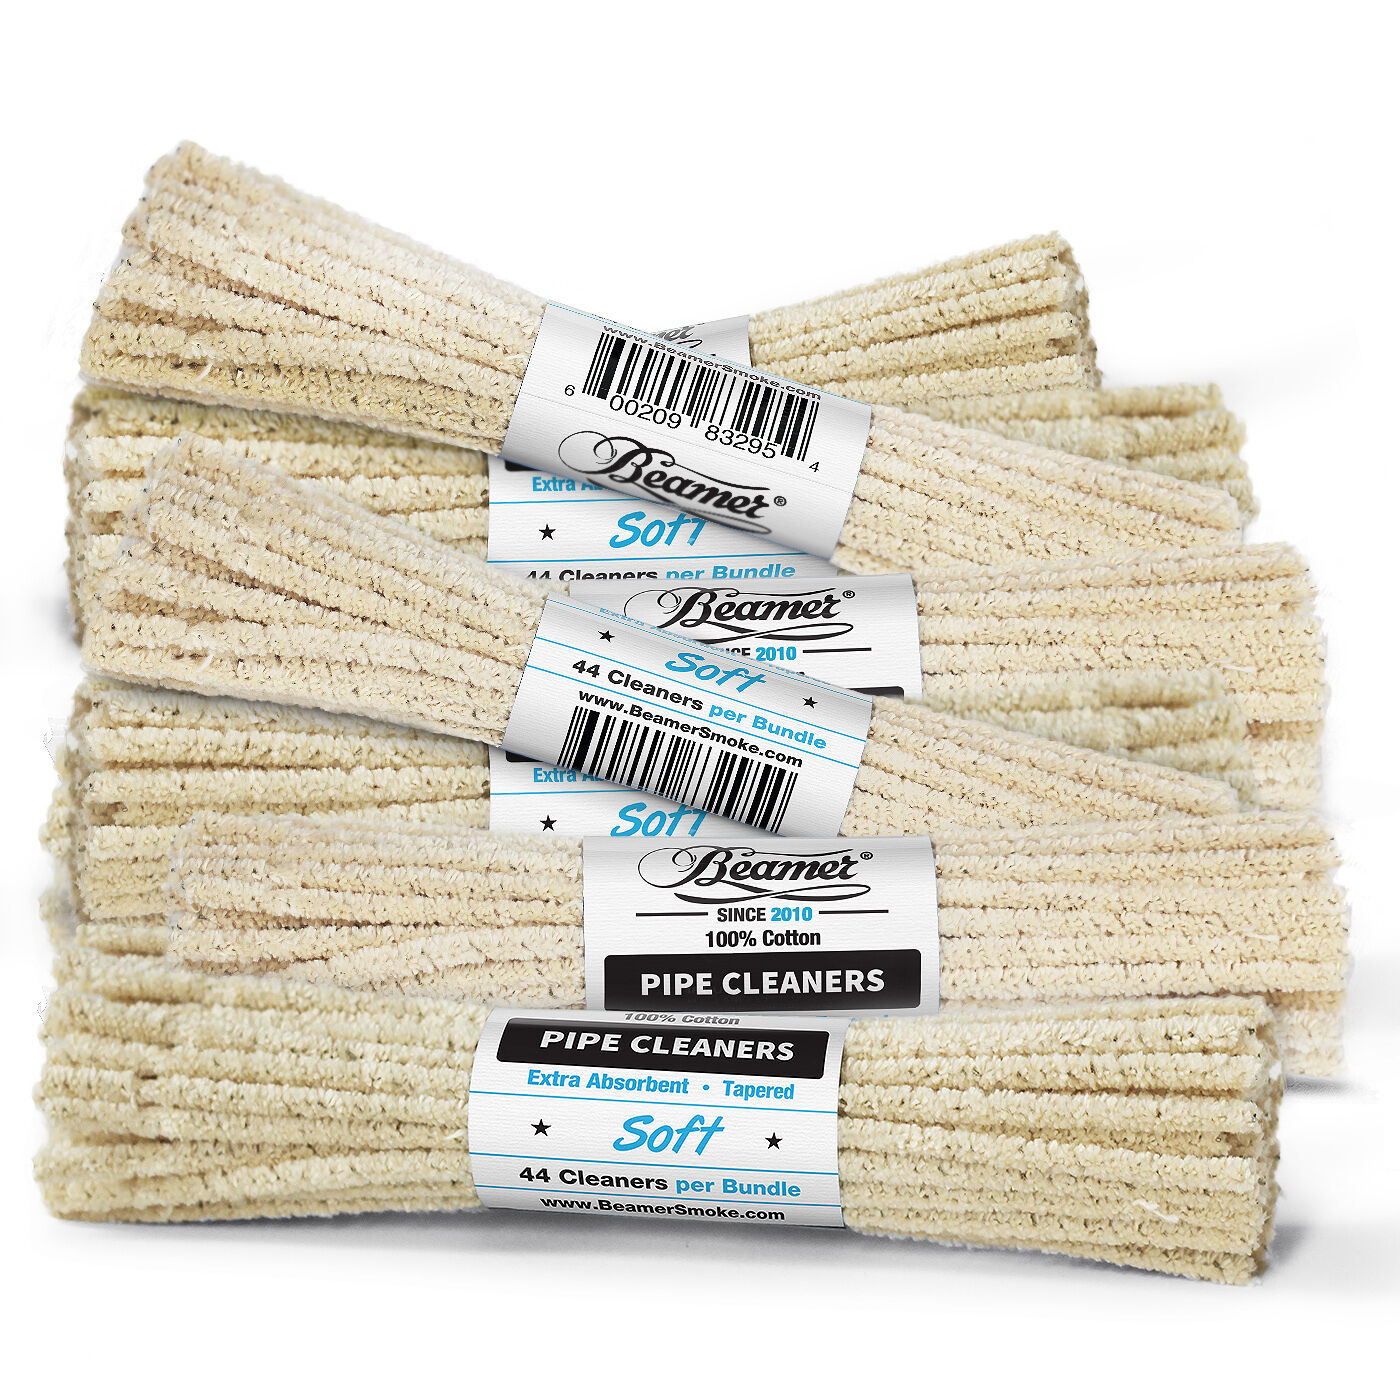 3 Bundles 132 ct Beamer Soft Unbleached Absorbent Pipe Cleaner for cleaning